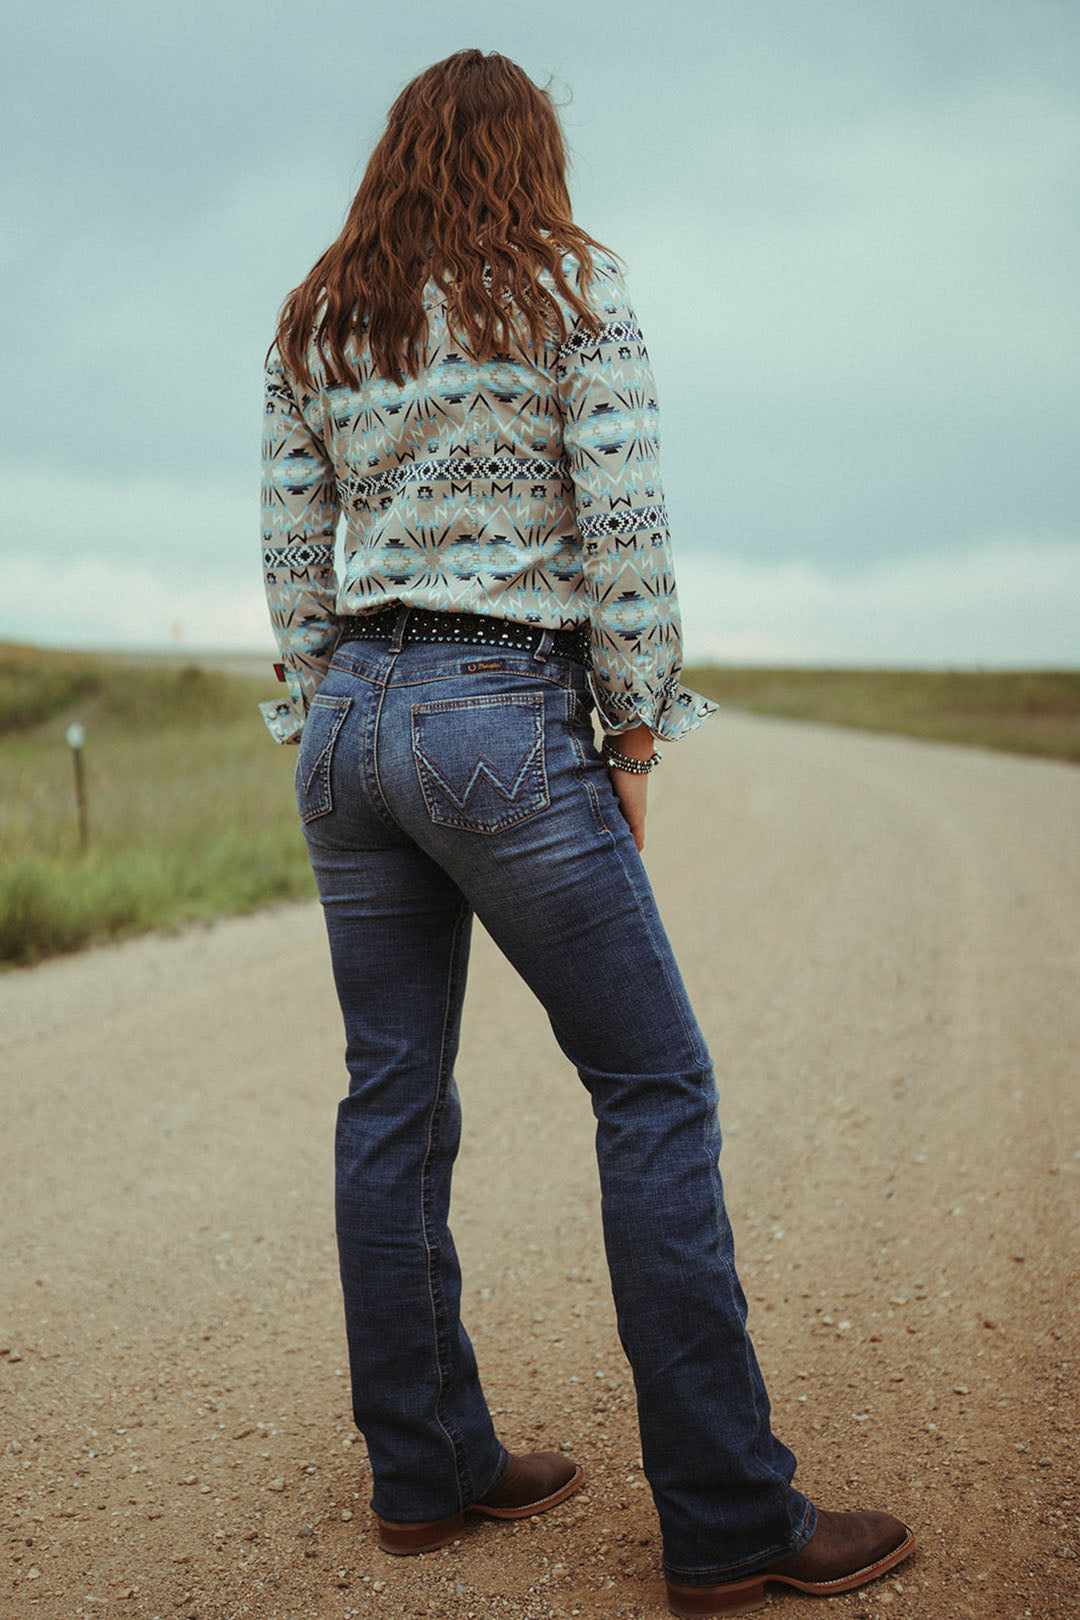 Women standing on dirt road modeling the Women's Ultimate Riding Jean by Wrangler.  2 back pockets.